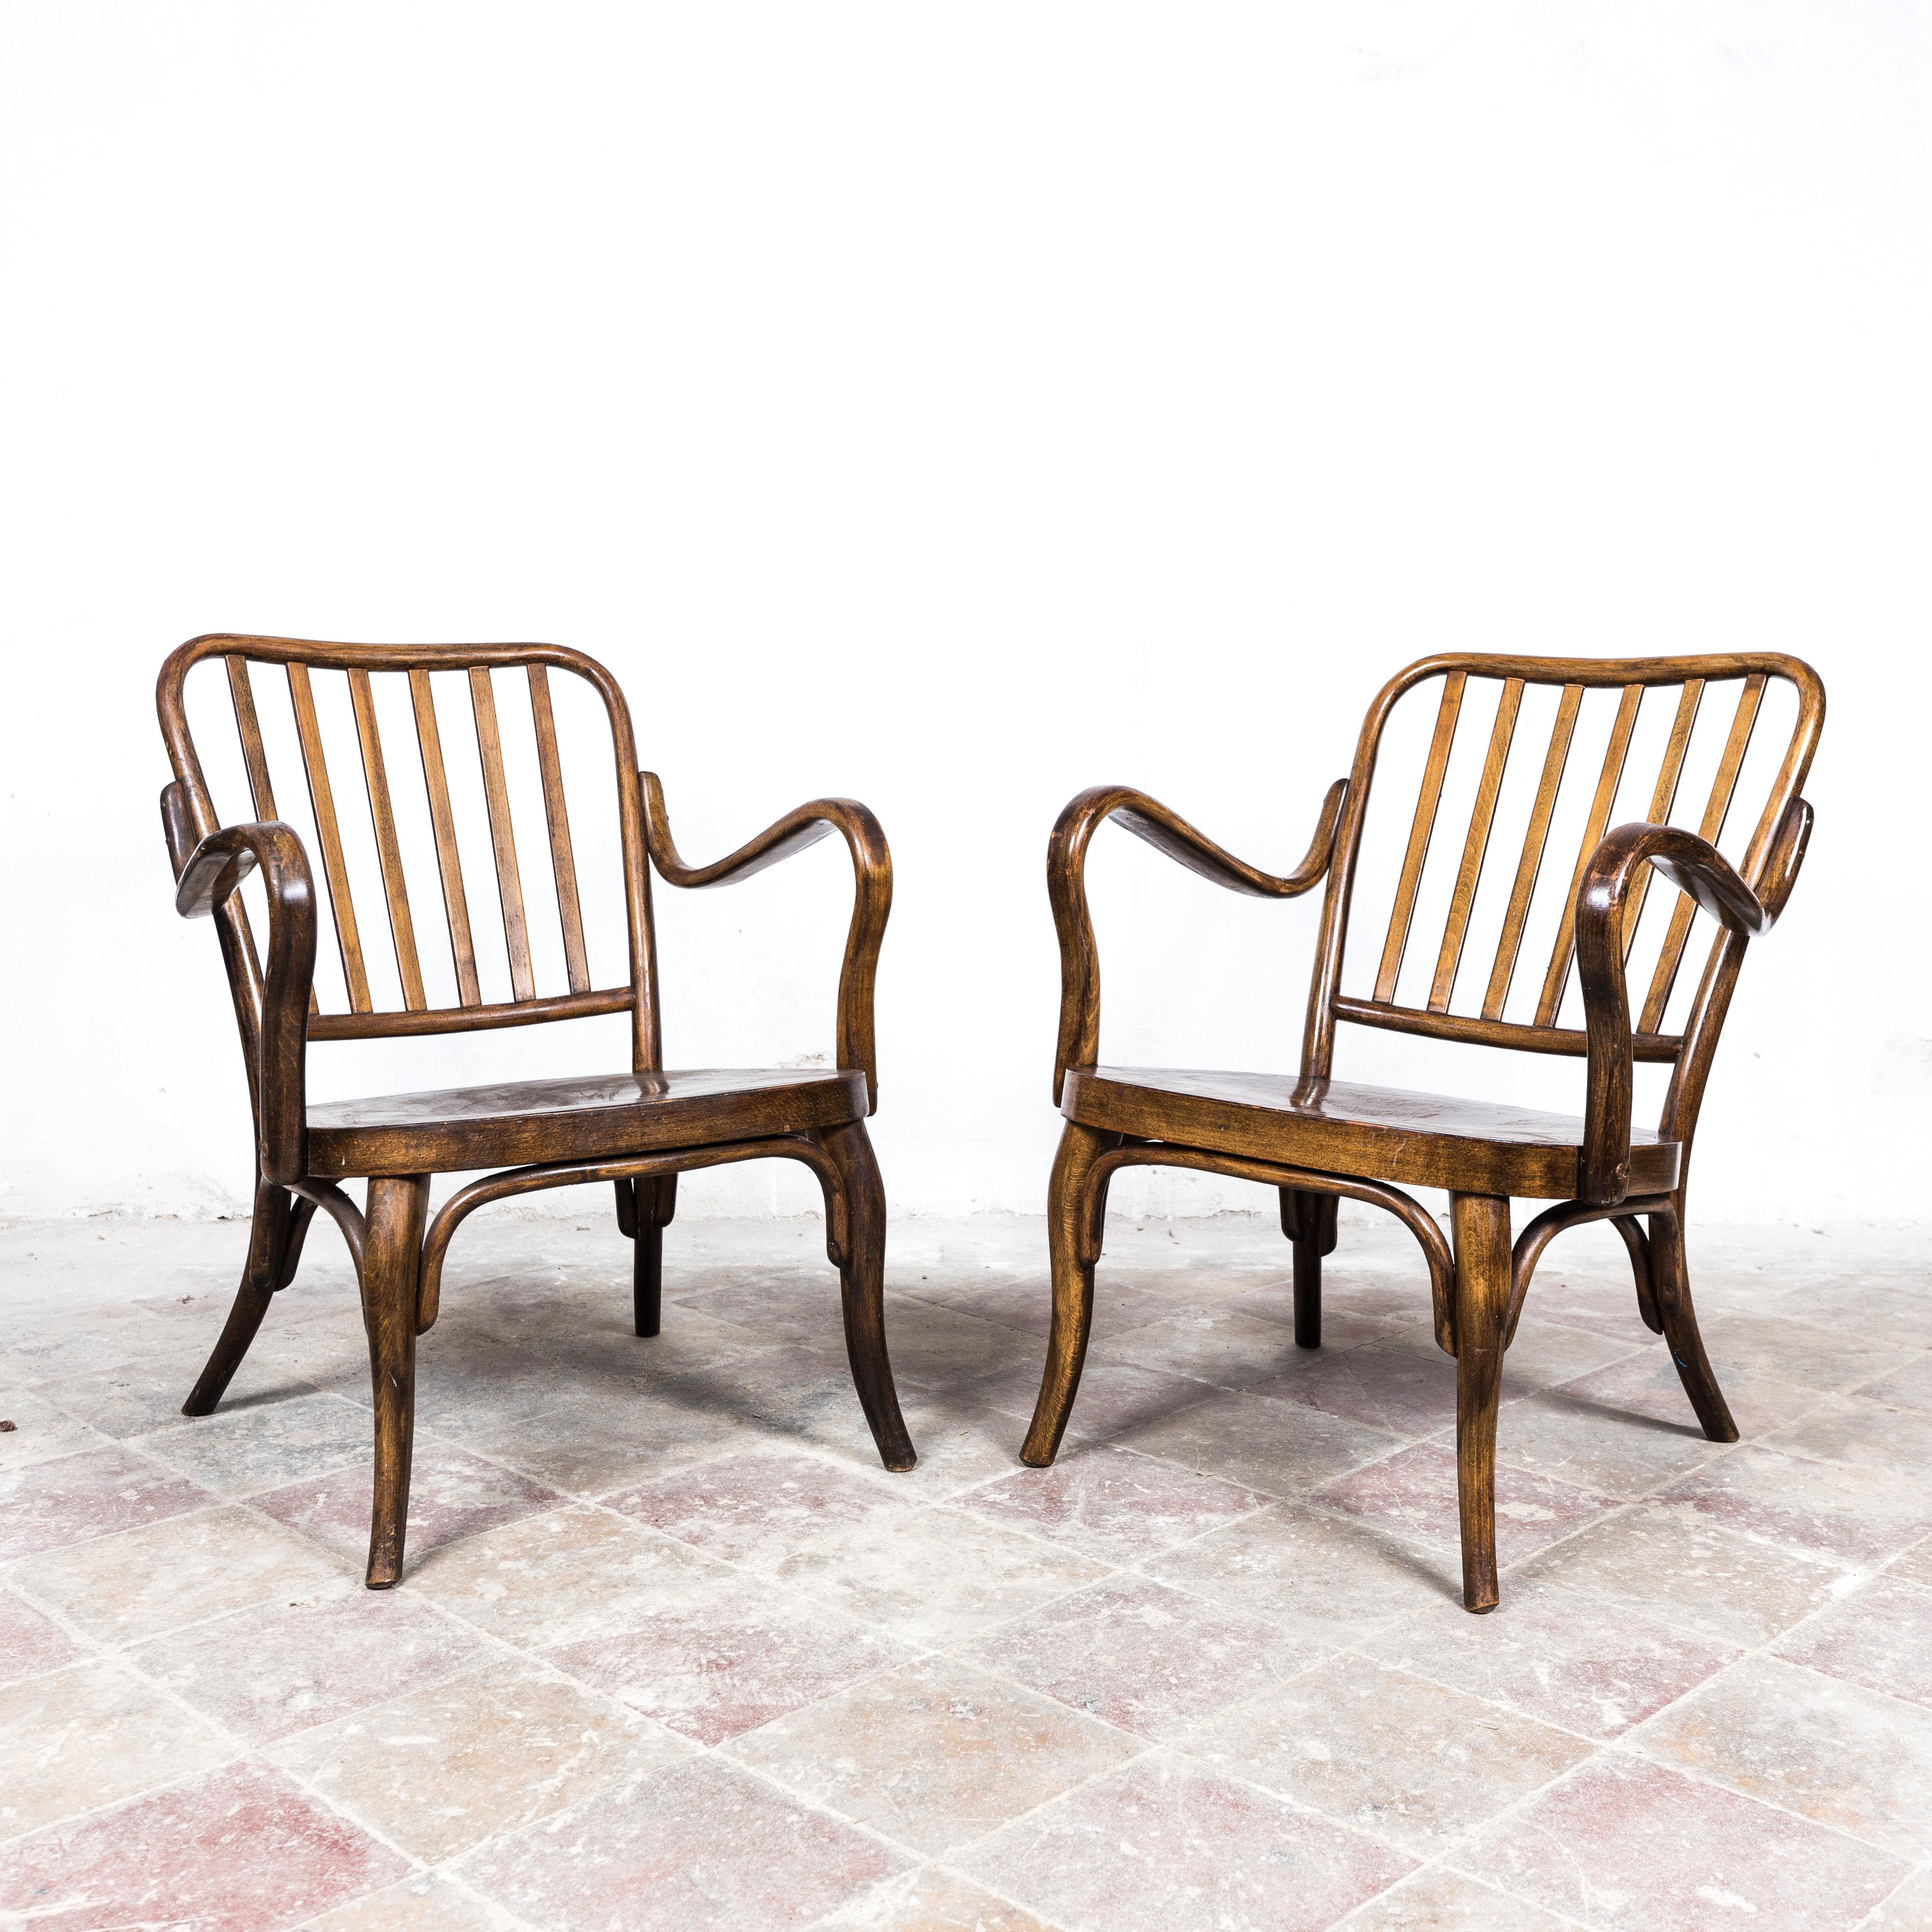 A pair of fireside chairs designed by Josef Frank. Vienna, c. 1930, manufactured by Thonet Mundus, Vienna. Bent beechwood, dark stained and polished plywood seats, in very good original condition, firm and steady. Marked with a Thonet paper label.